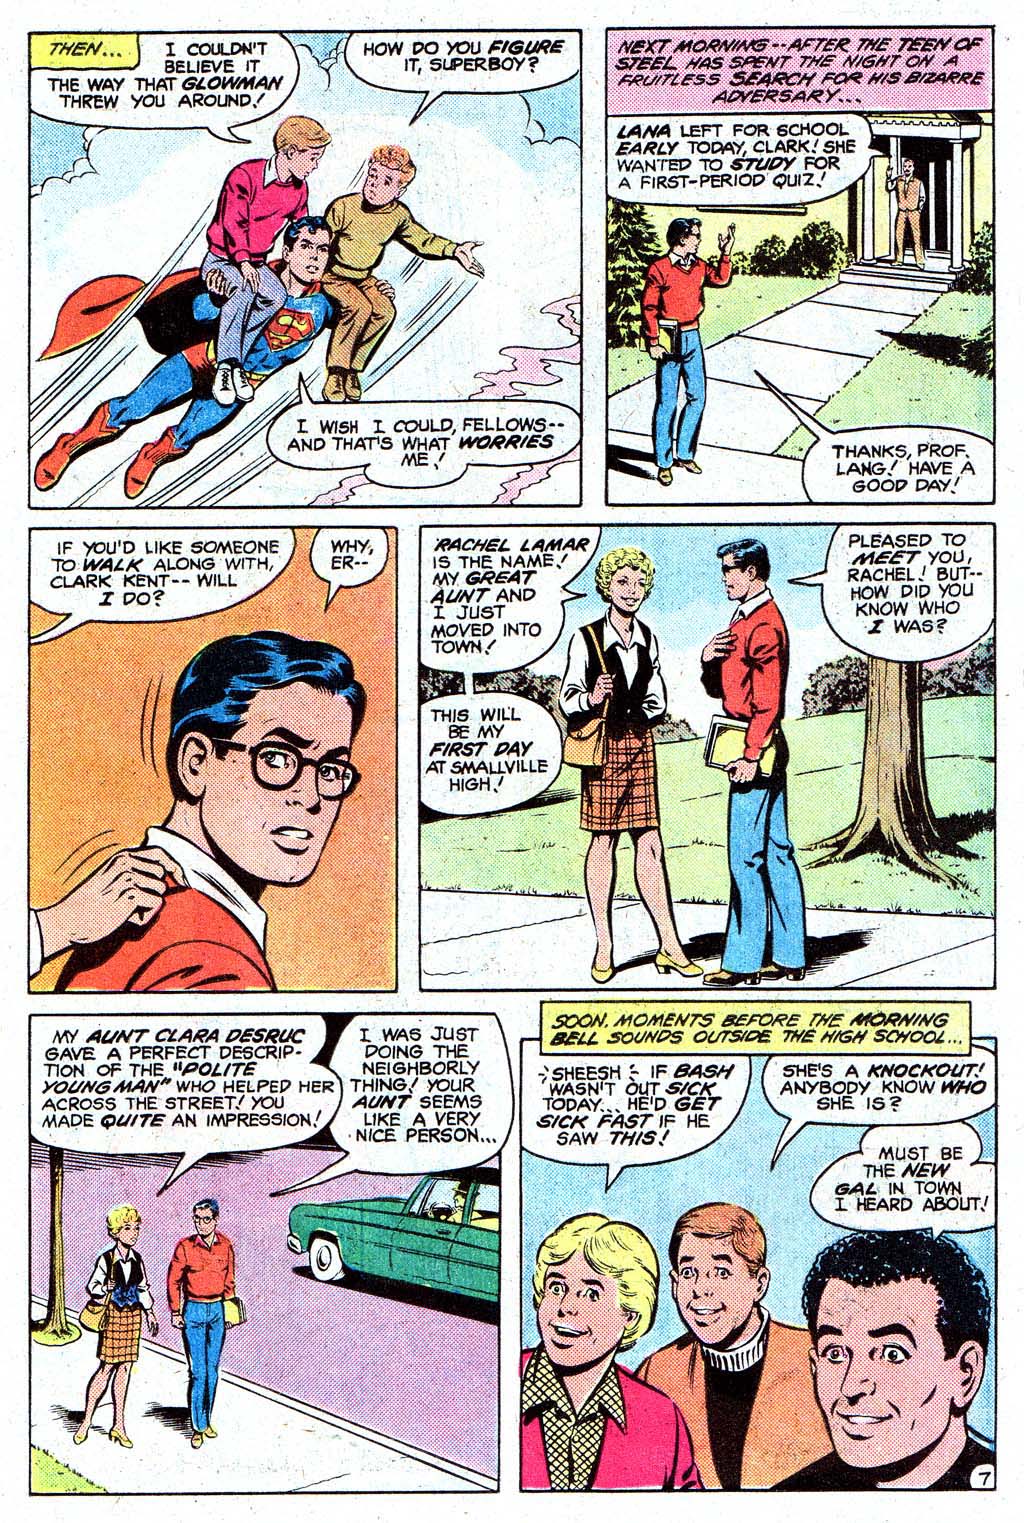 The New Adventures of Superboy 30 Page 10